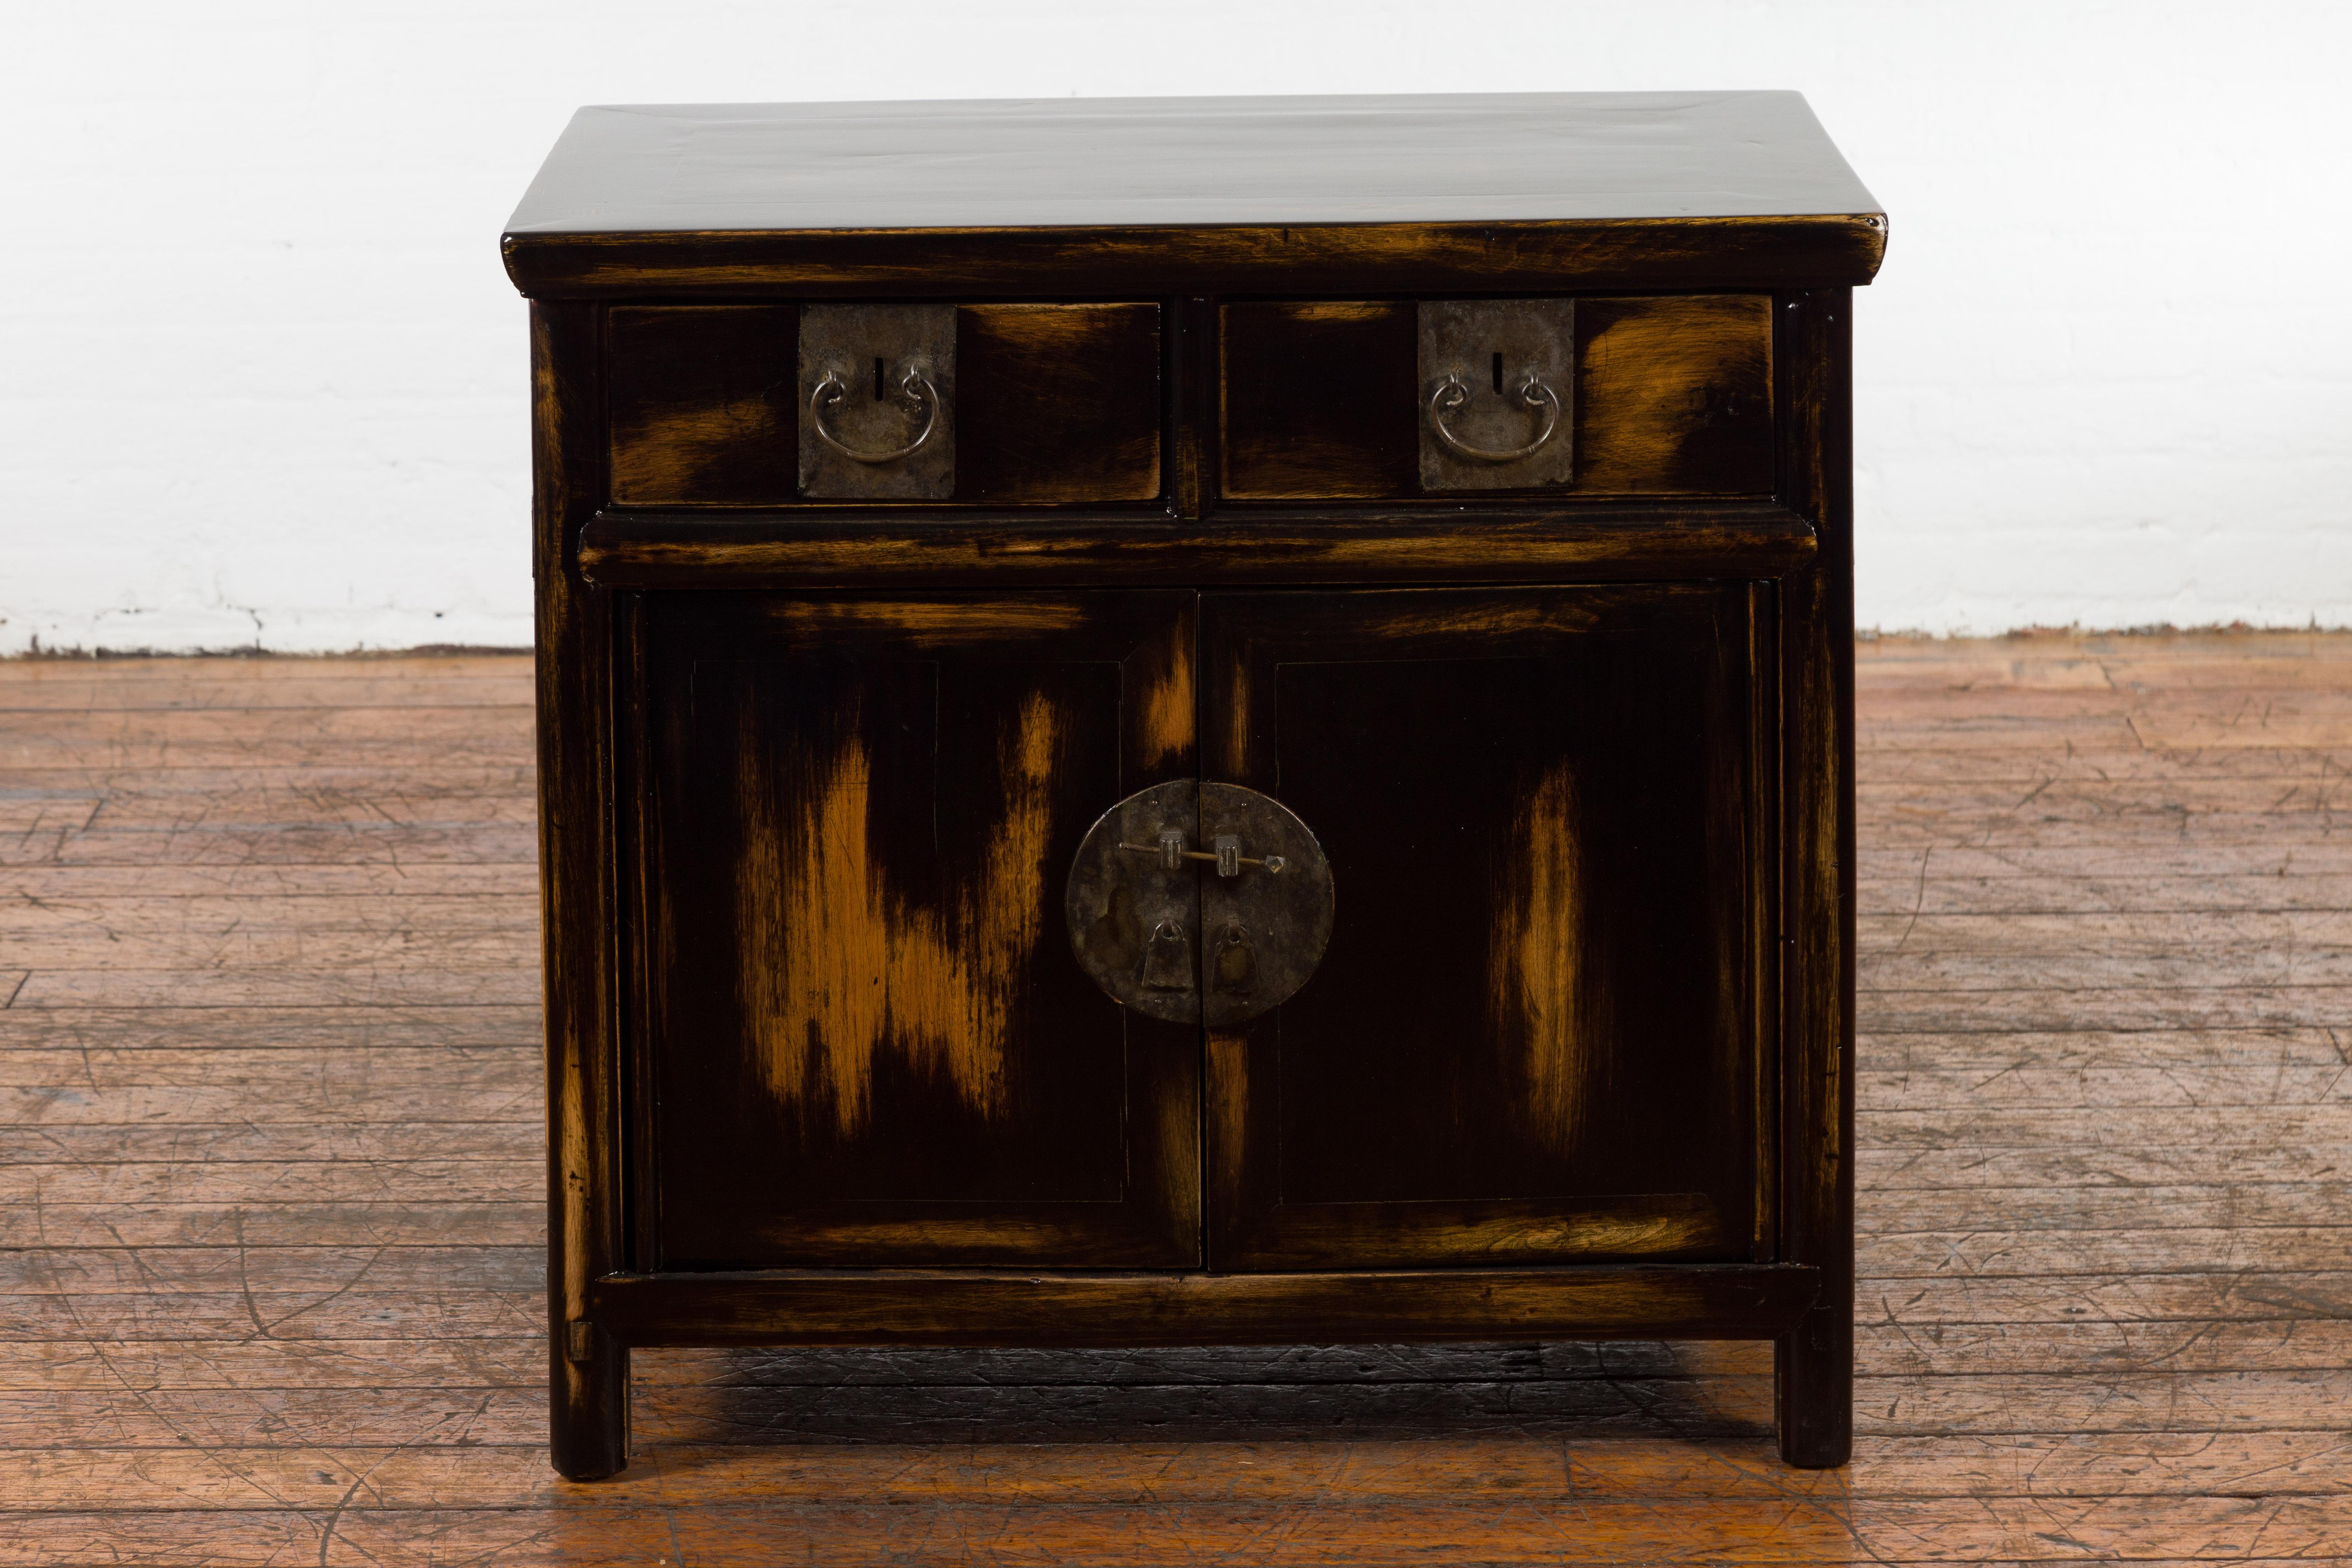 A Chinese Qing Dynasty period side cabinet from the 19th century with custom black and brown lacquer, two drawers and two doors. Created in China during the Qing Dynasty period in the 19th century, this side cabinet features a rectangular with